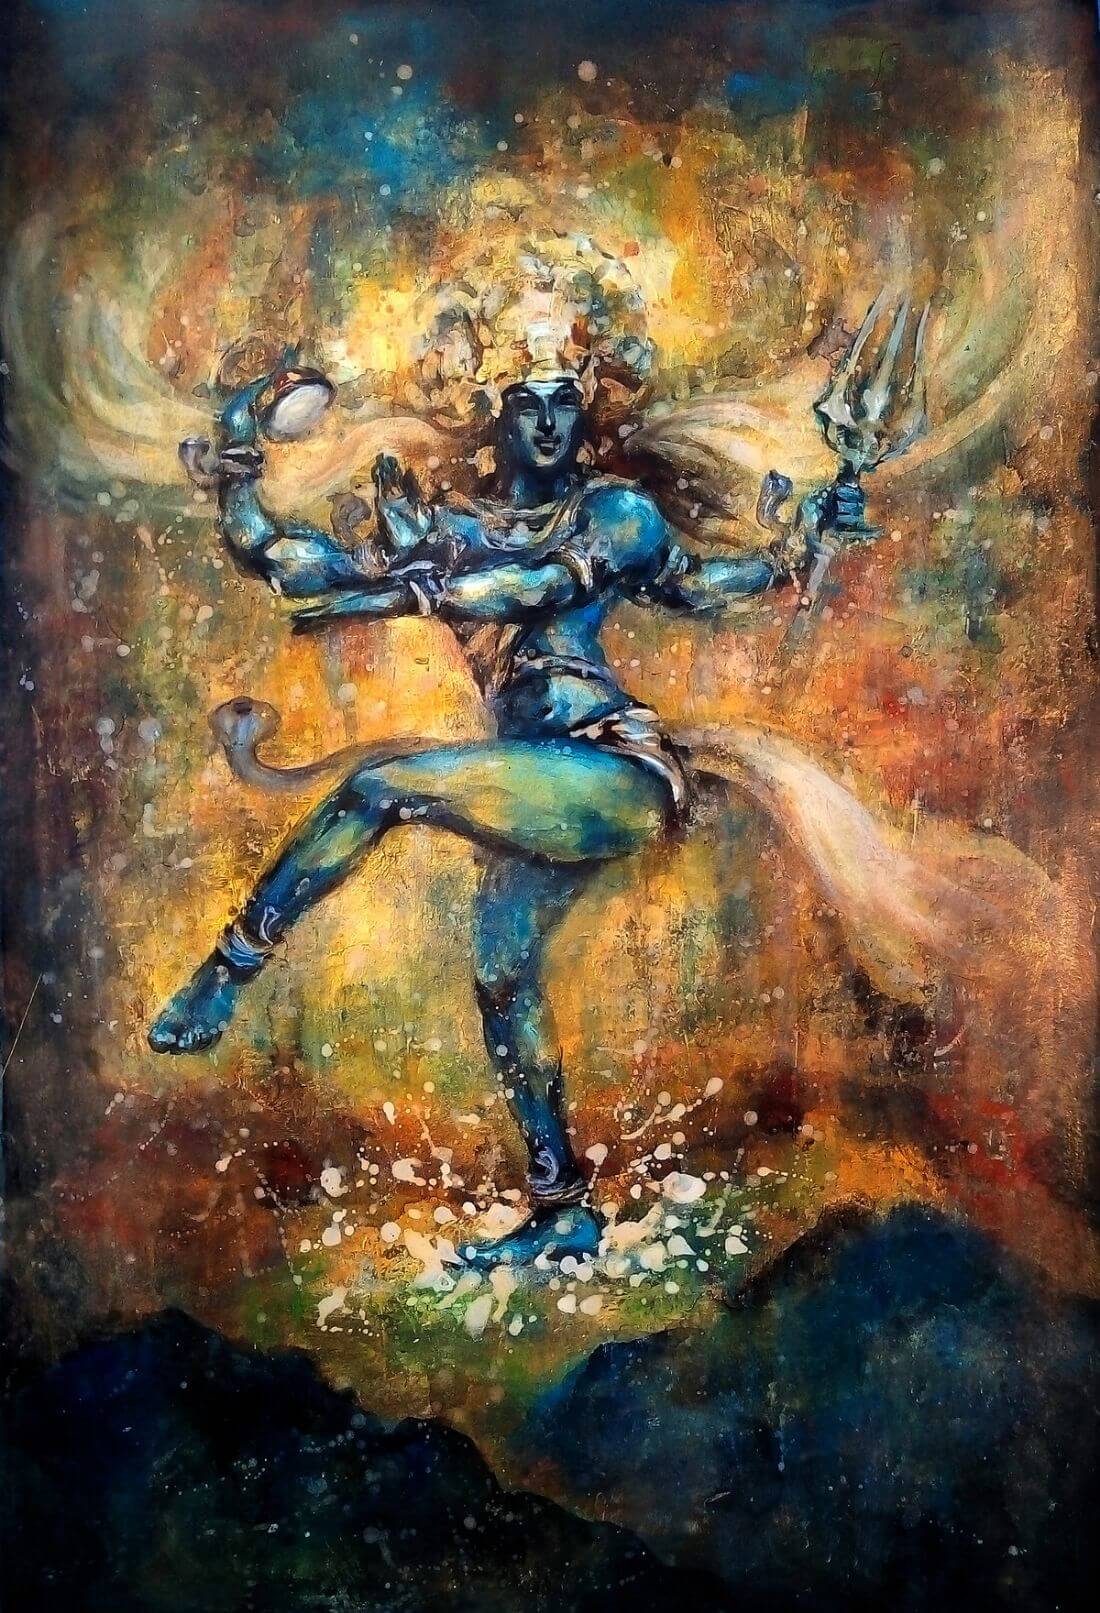 Natraj Lord Shiva - Indian Religious Painting - Posters by Shiva ...